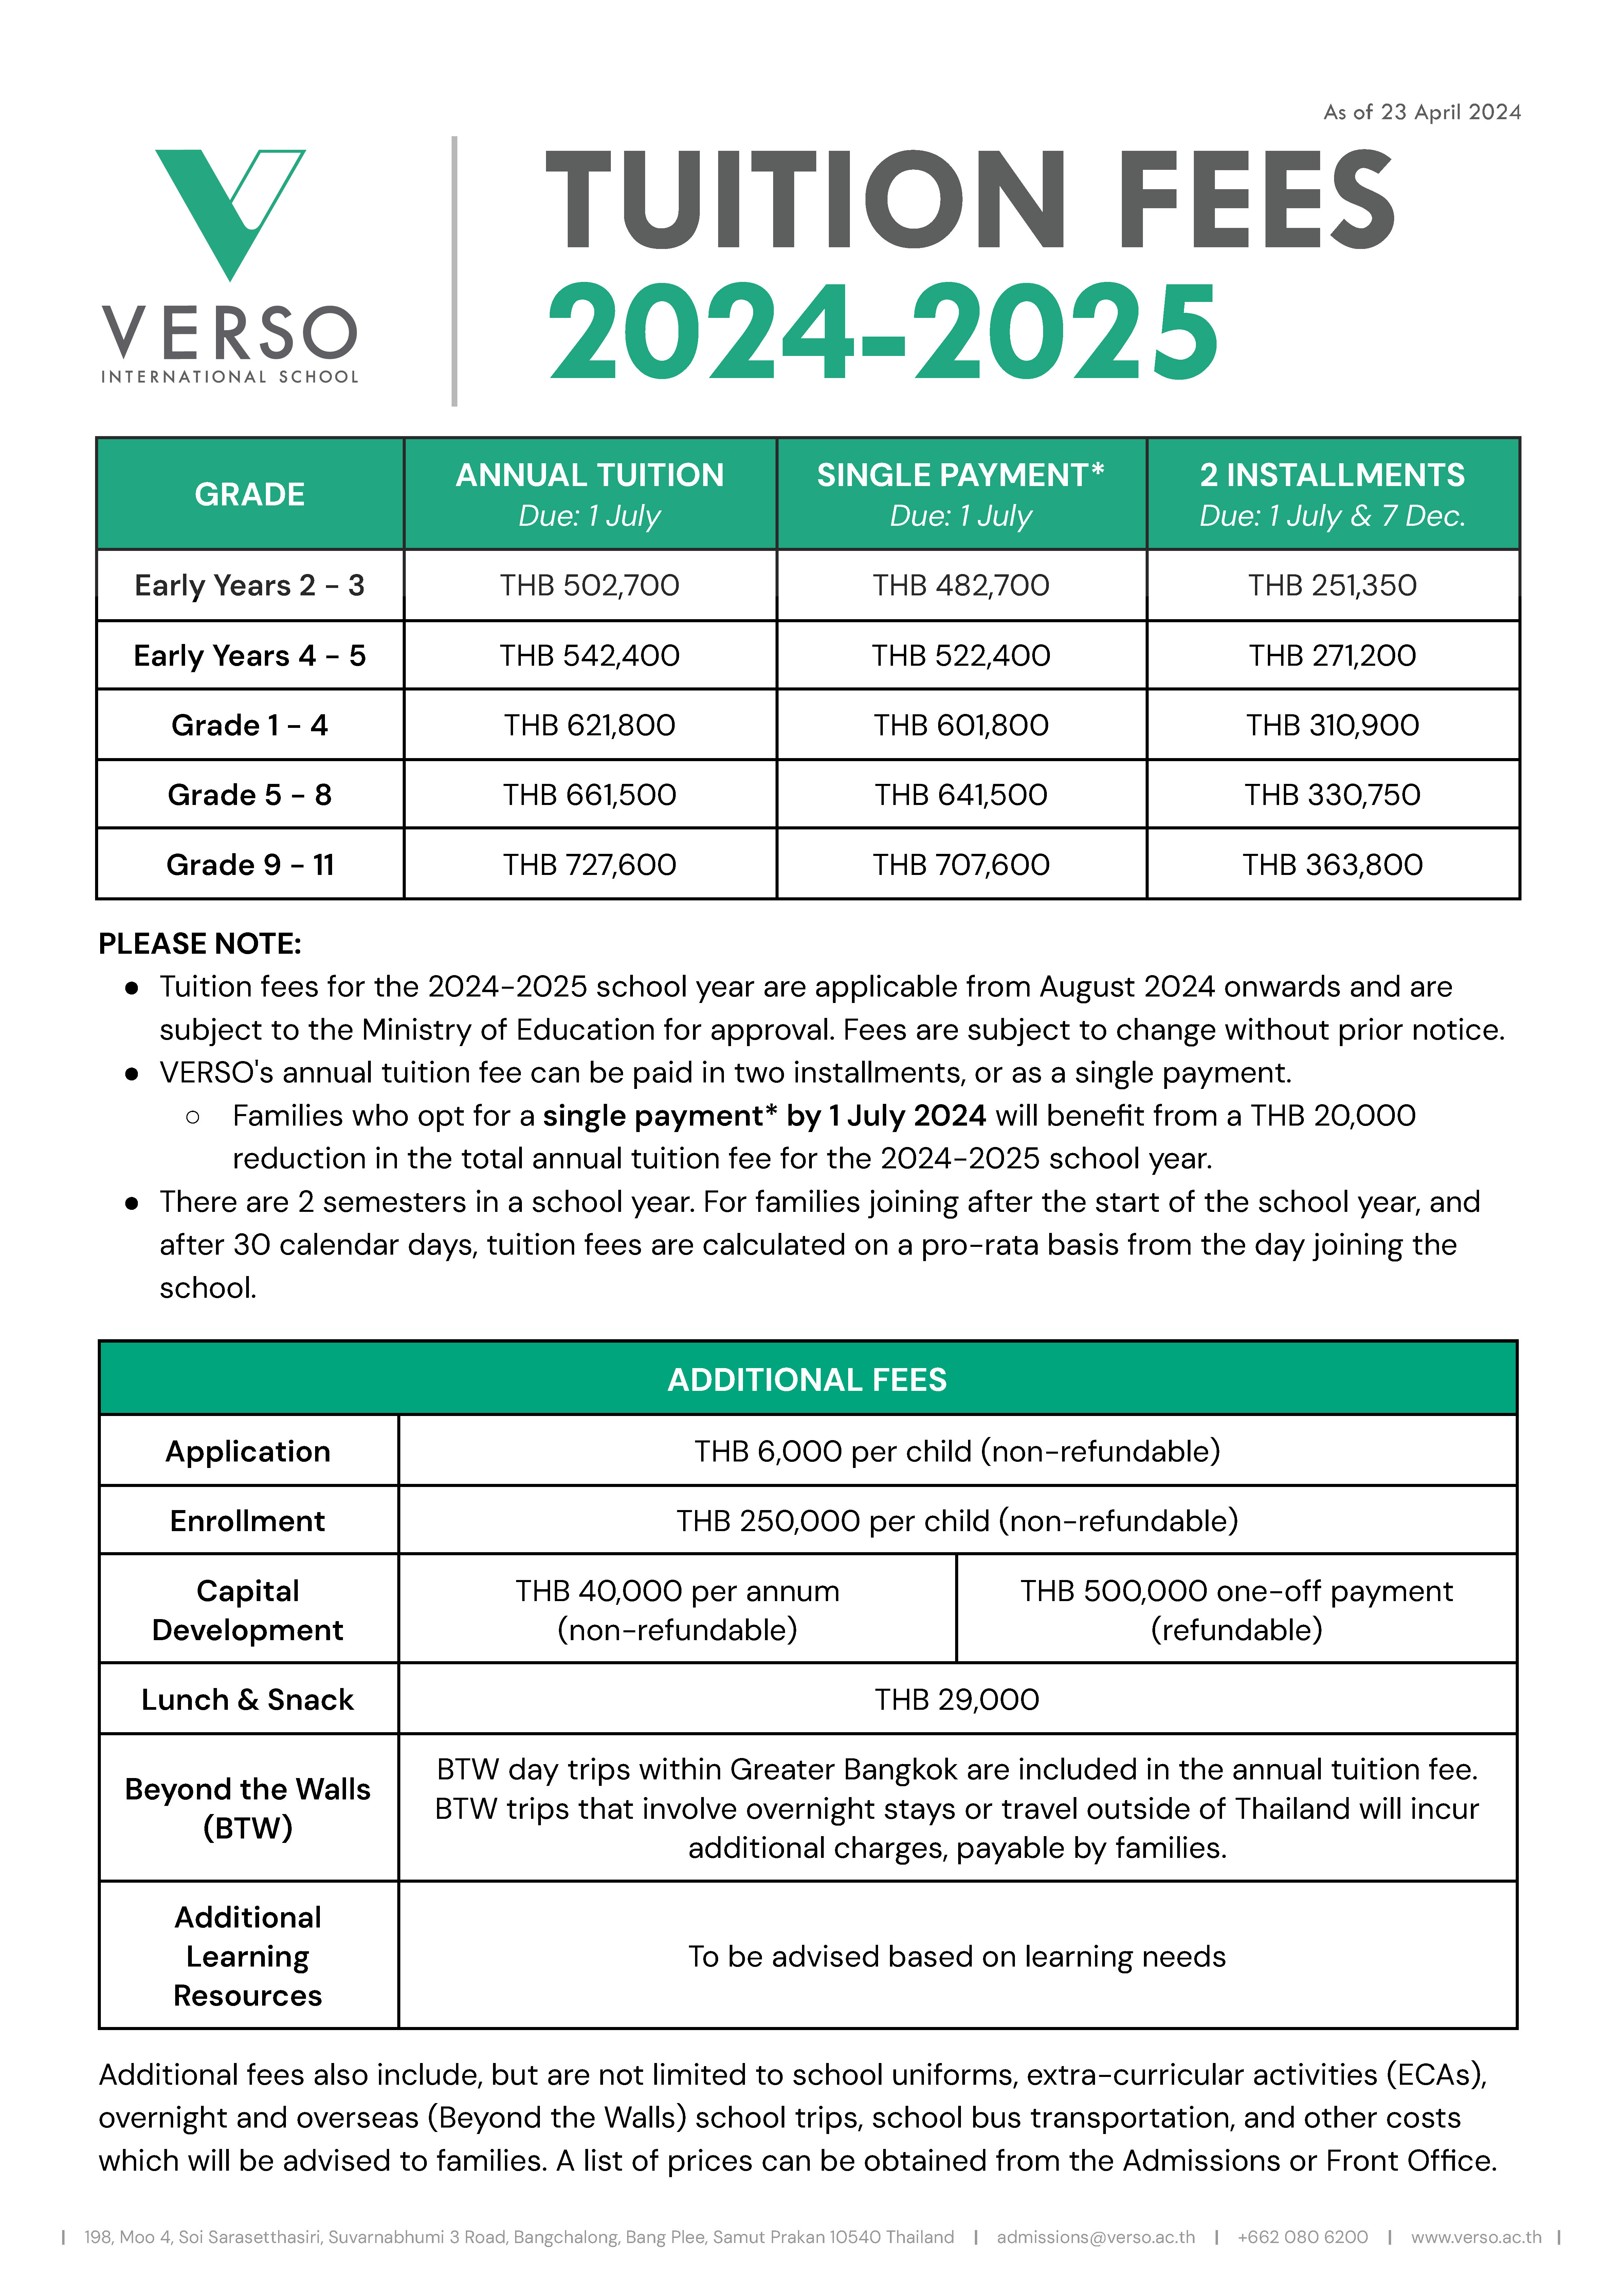 VERSO TUITION FEES 2024-2025